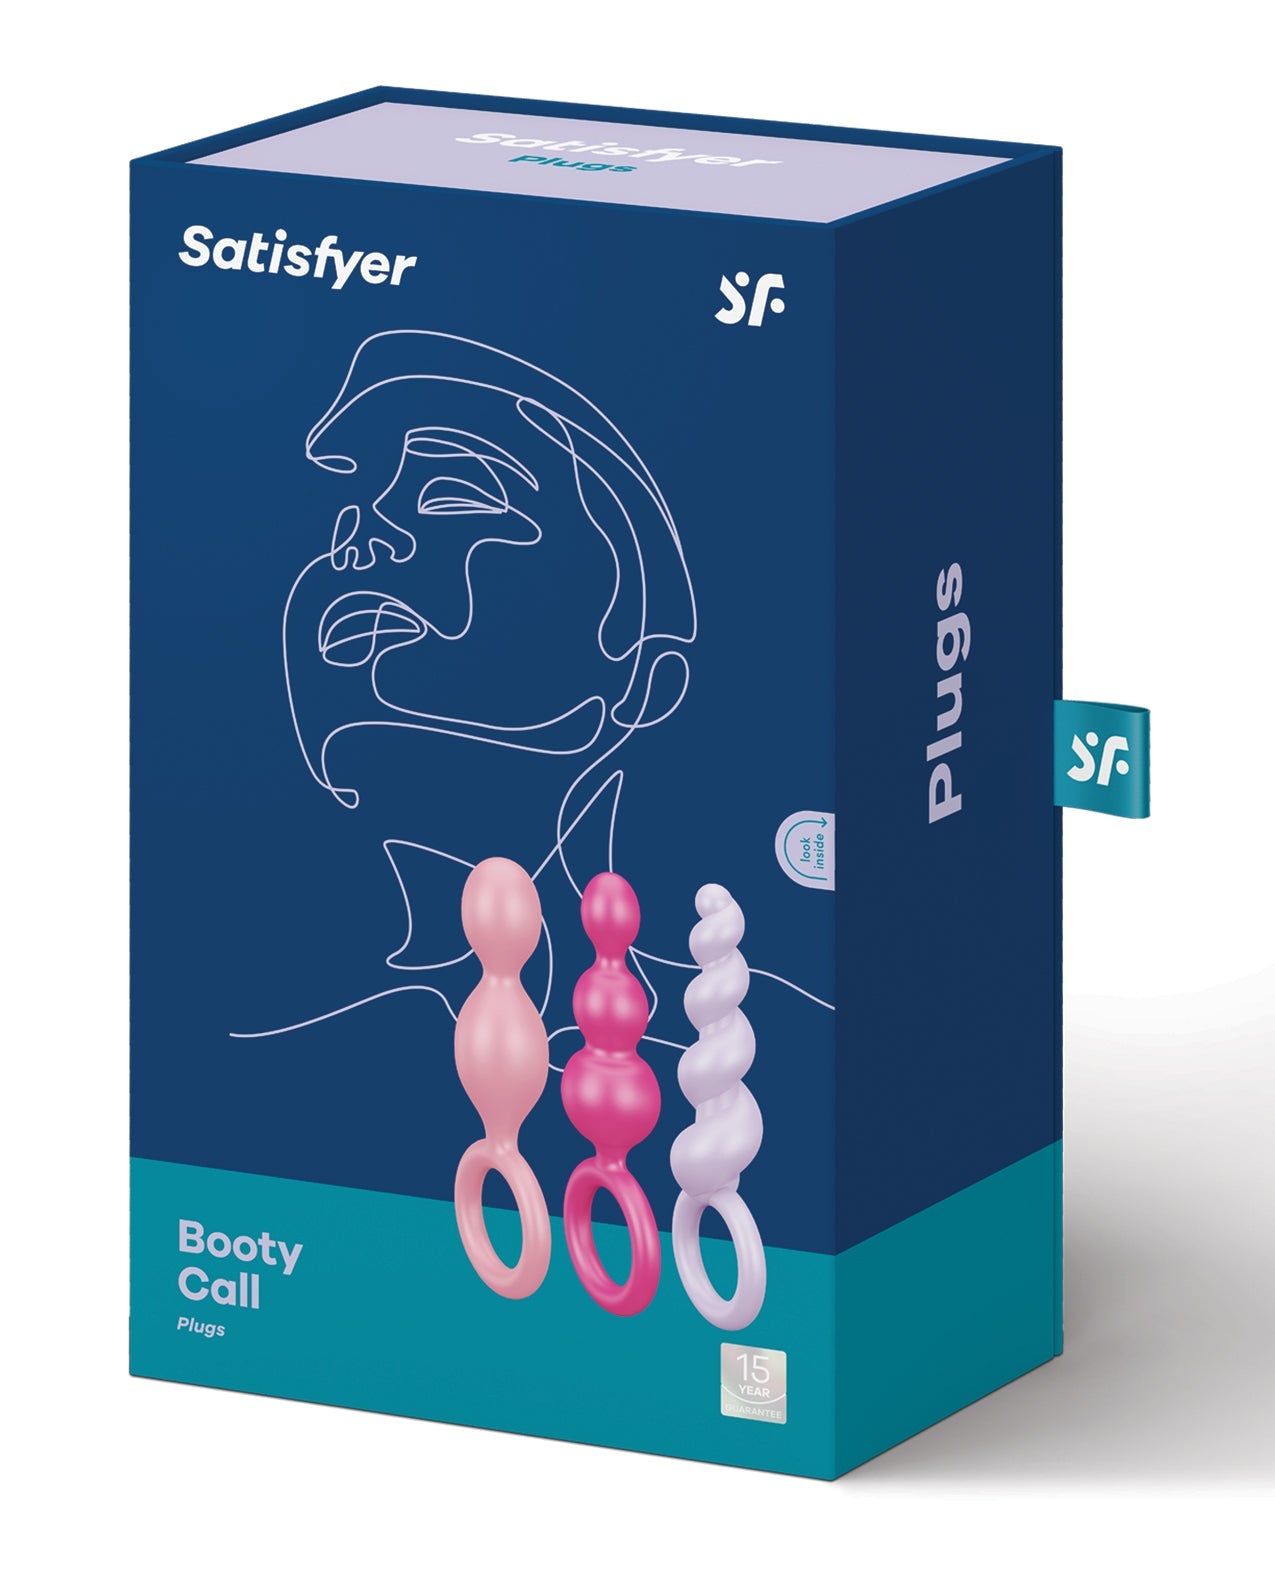 Satisfyer Booty Call Plugs - Asst. Colors